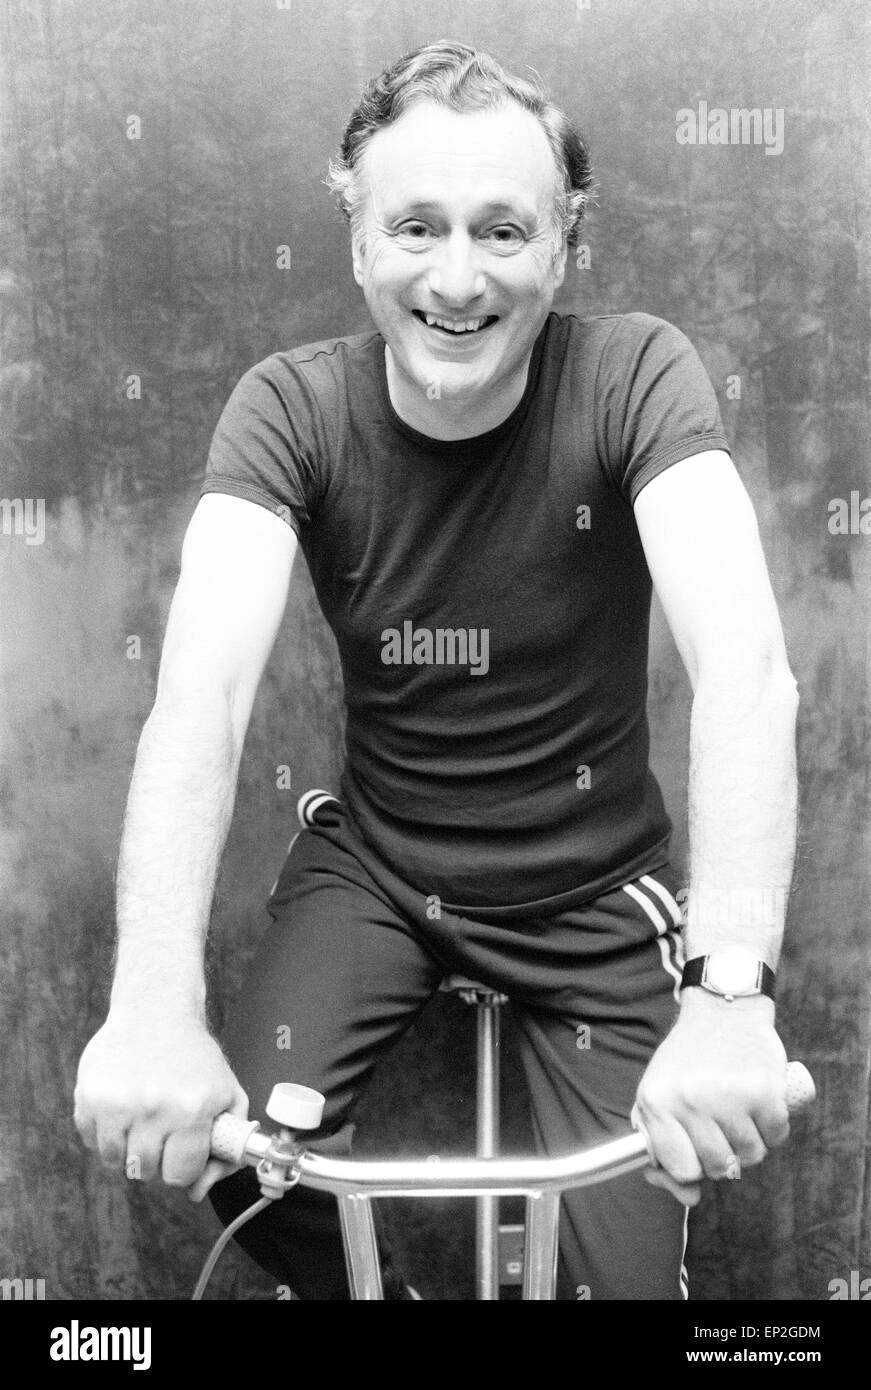 Paul Eddington, star of BBC TV Series 'The Good Life', as character Jeremy Leadbetter, pictured taking the Daily Mirror Fitness Test, at The Debenham Health Club, London, 30th May 1977. Stock Photo